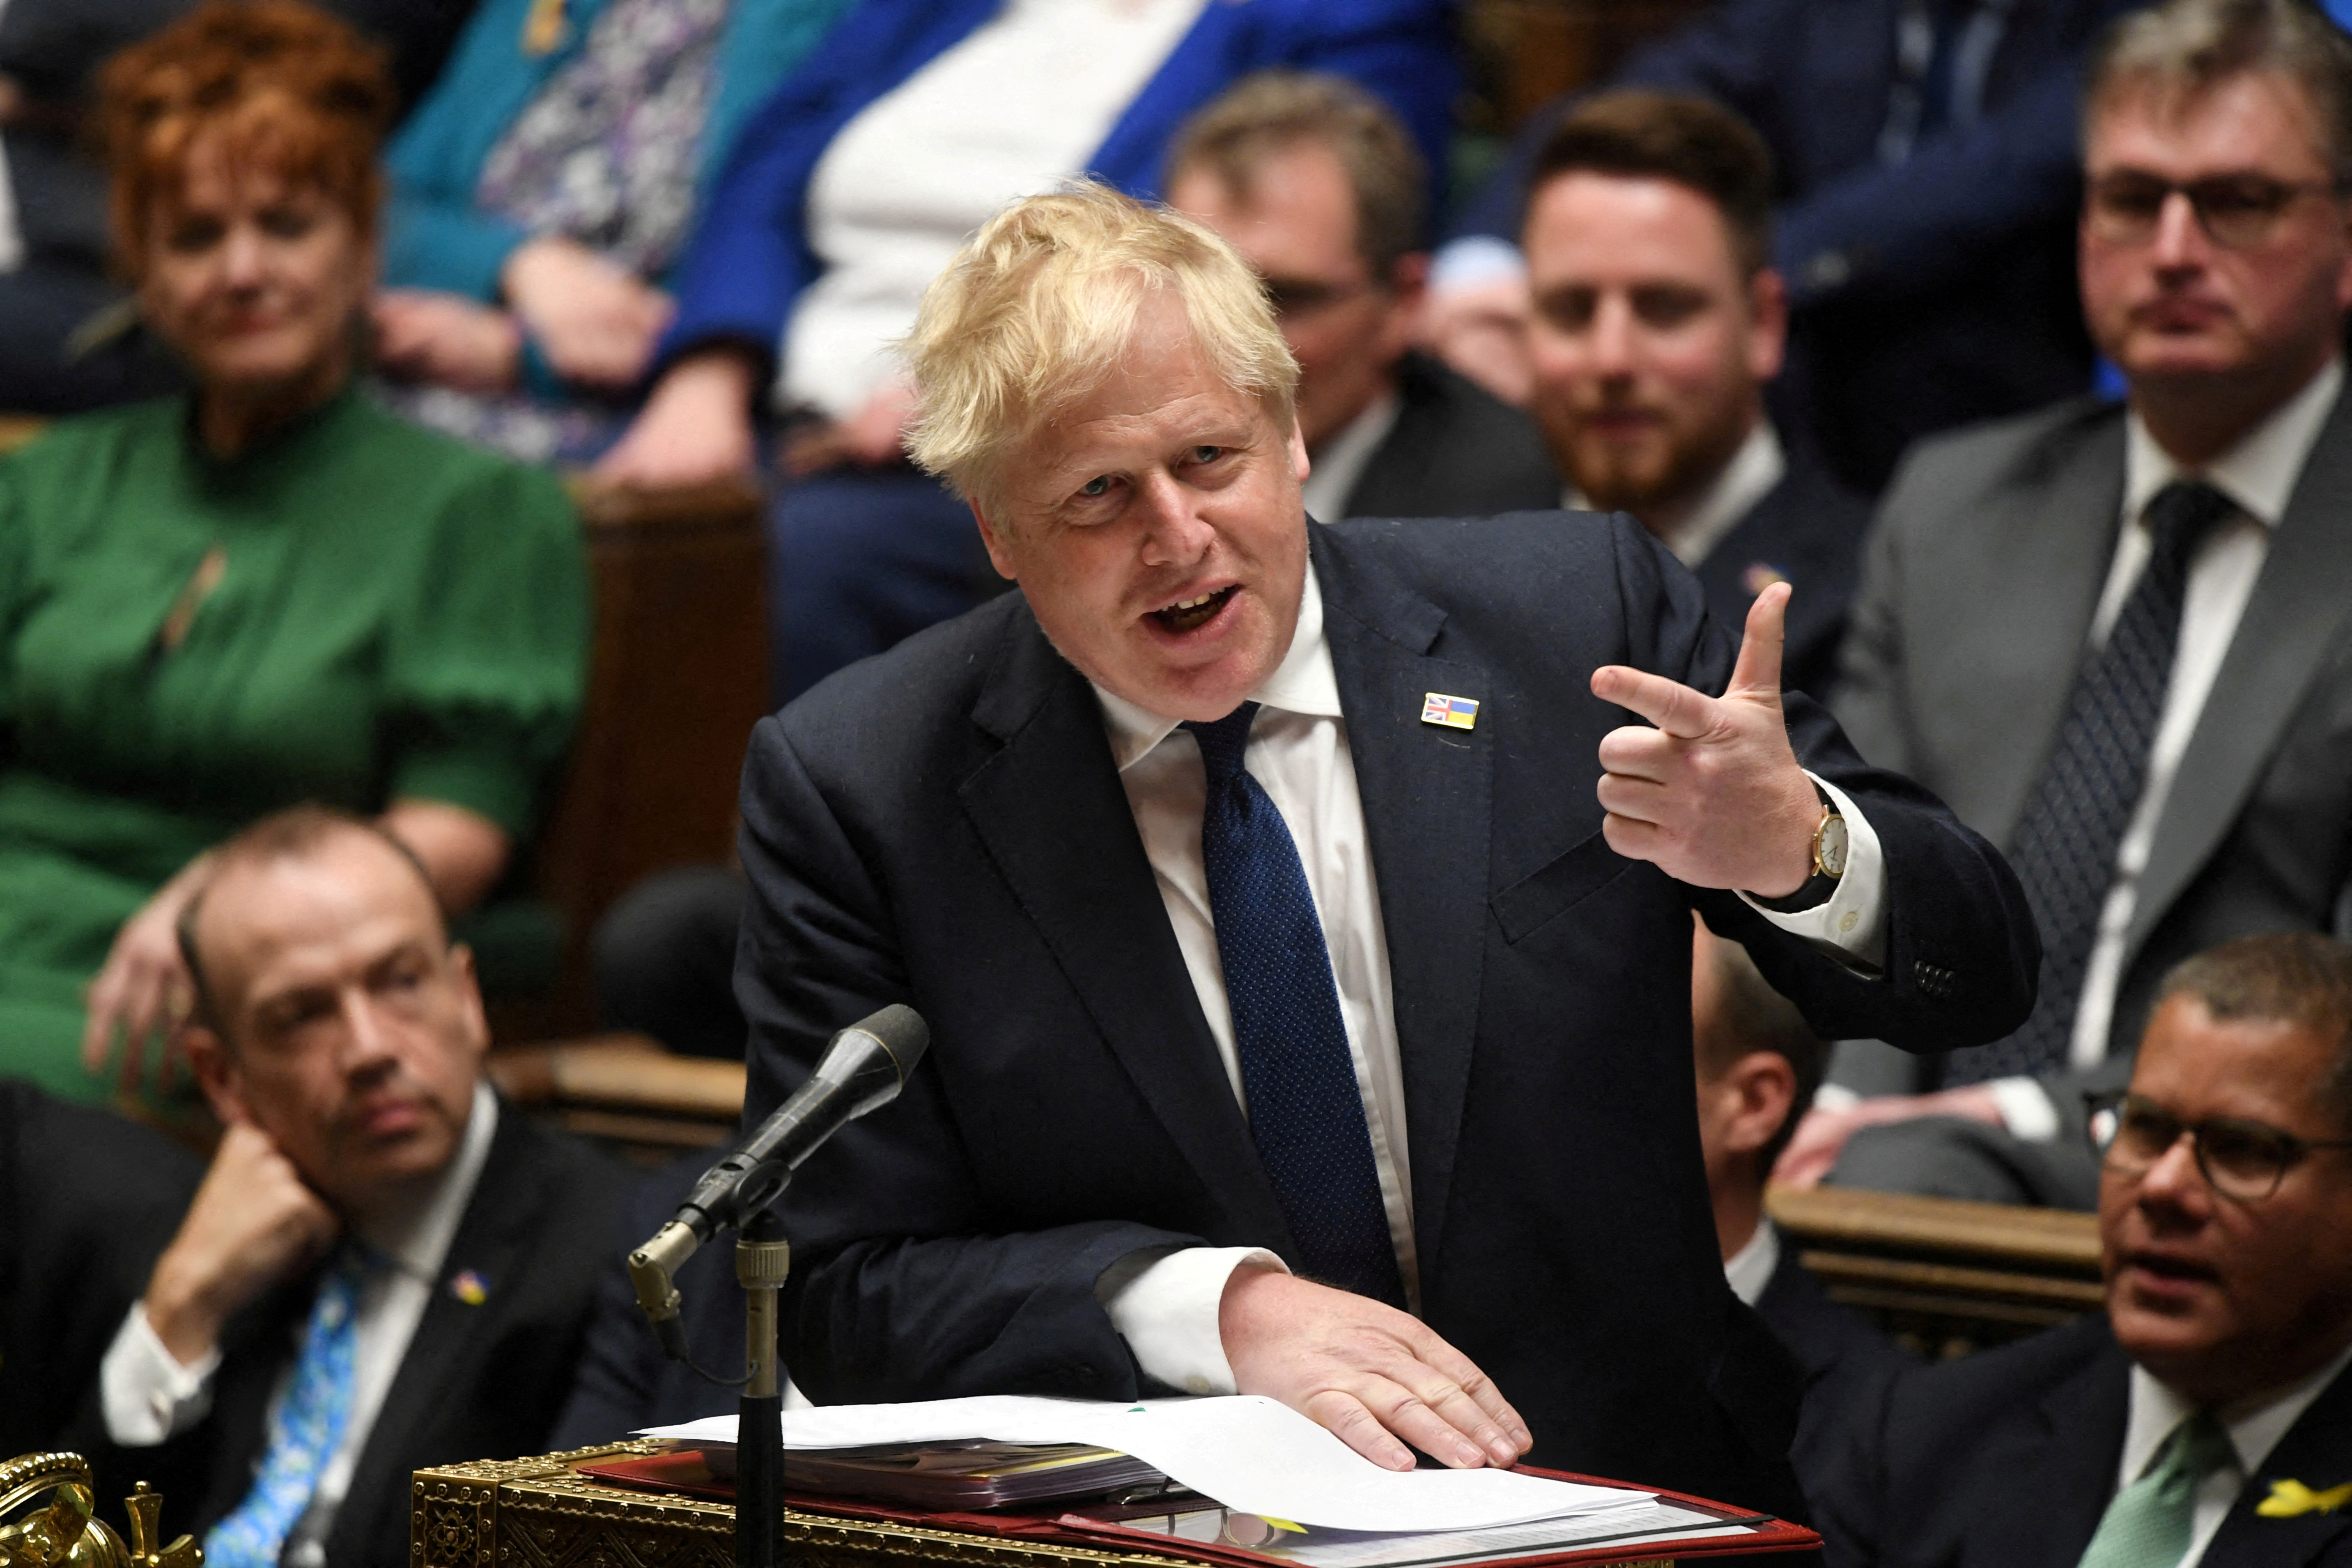 British Prime Minister Boris Johnson answers questions during a House of Commons session in London